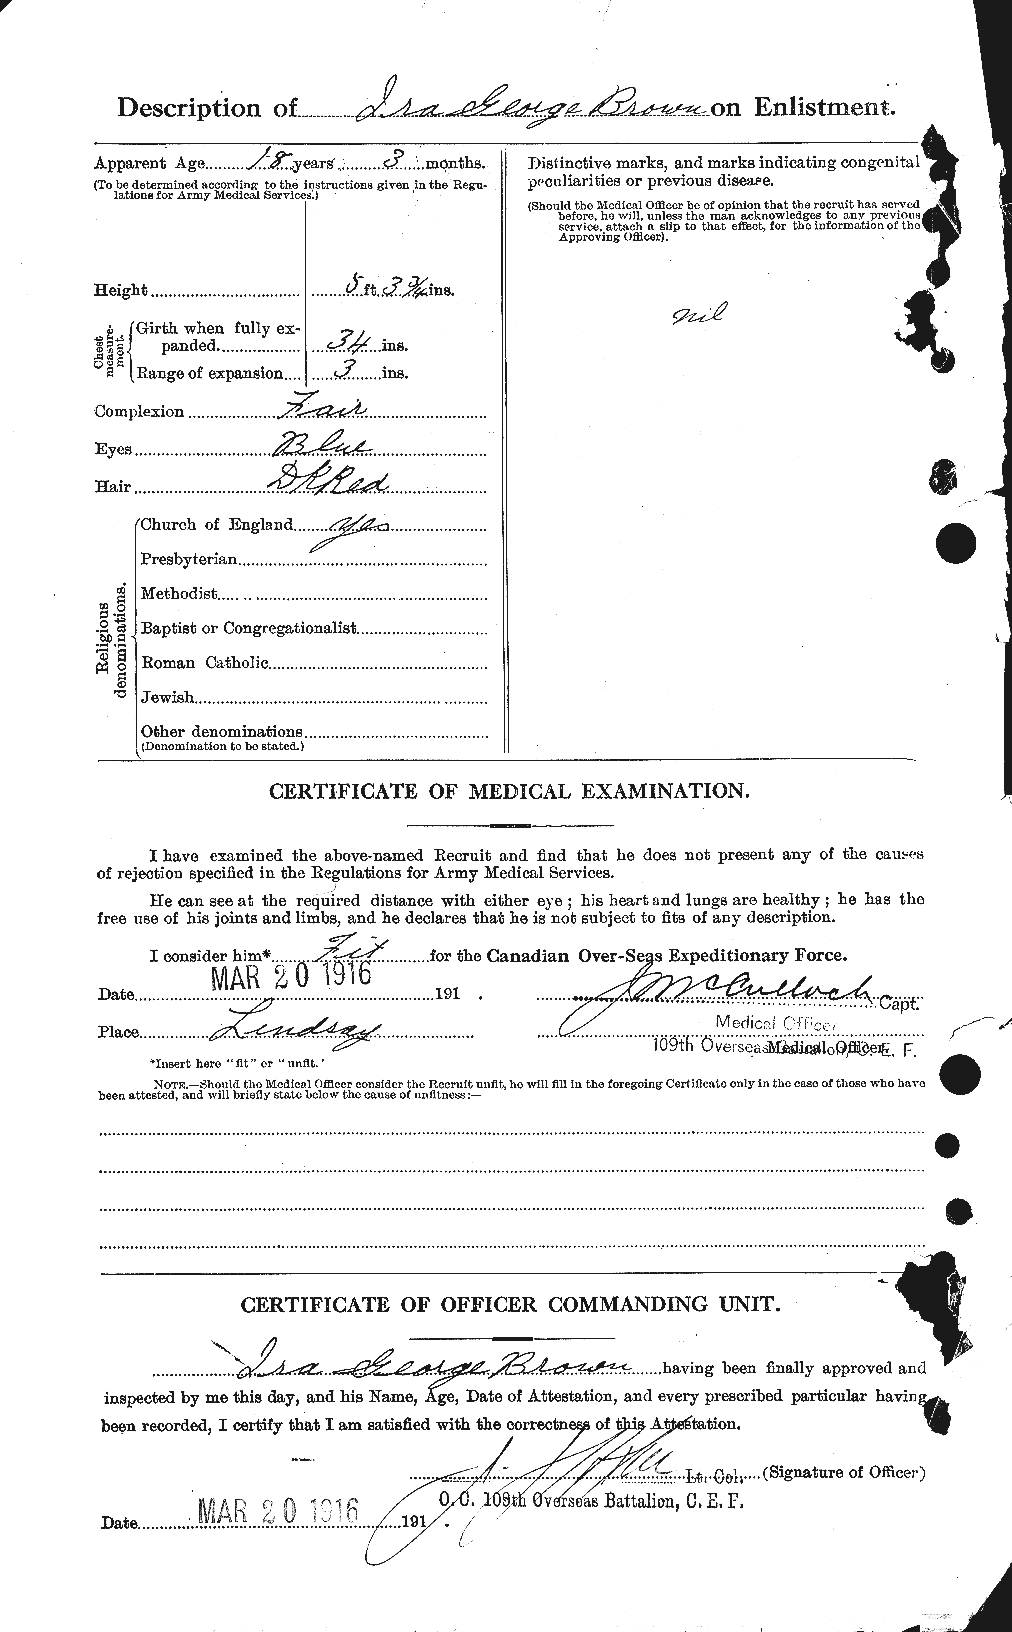 Personnel Records of the First World War - CEF 265657b